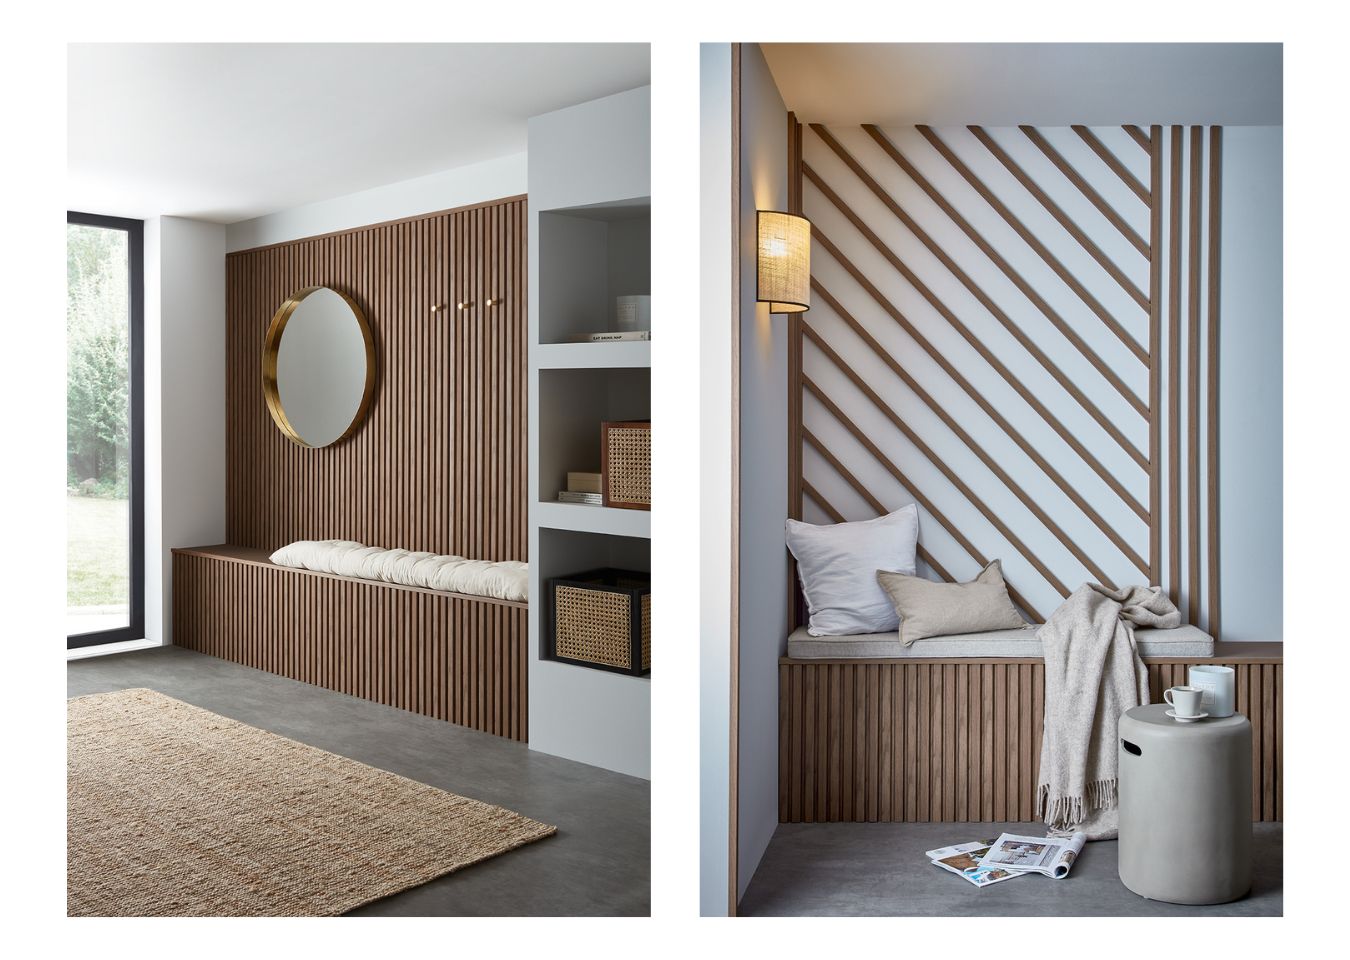 Two images show Walnut SlatWall Waterproof in different rooms. On the left shows an entrance area with the backwall covered in SlatWall, continued down onto the bench. On the right shows another bench covered in Slatwall Waterproof but Walnut  Individual SlatWall Slats have been used to make a geometric design on the wall